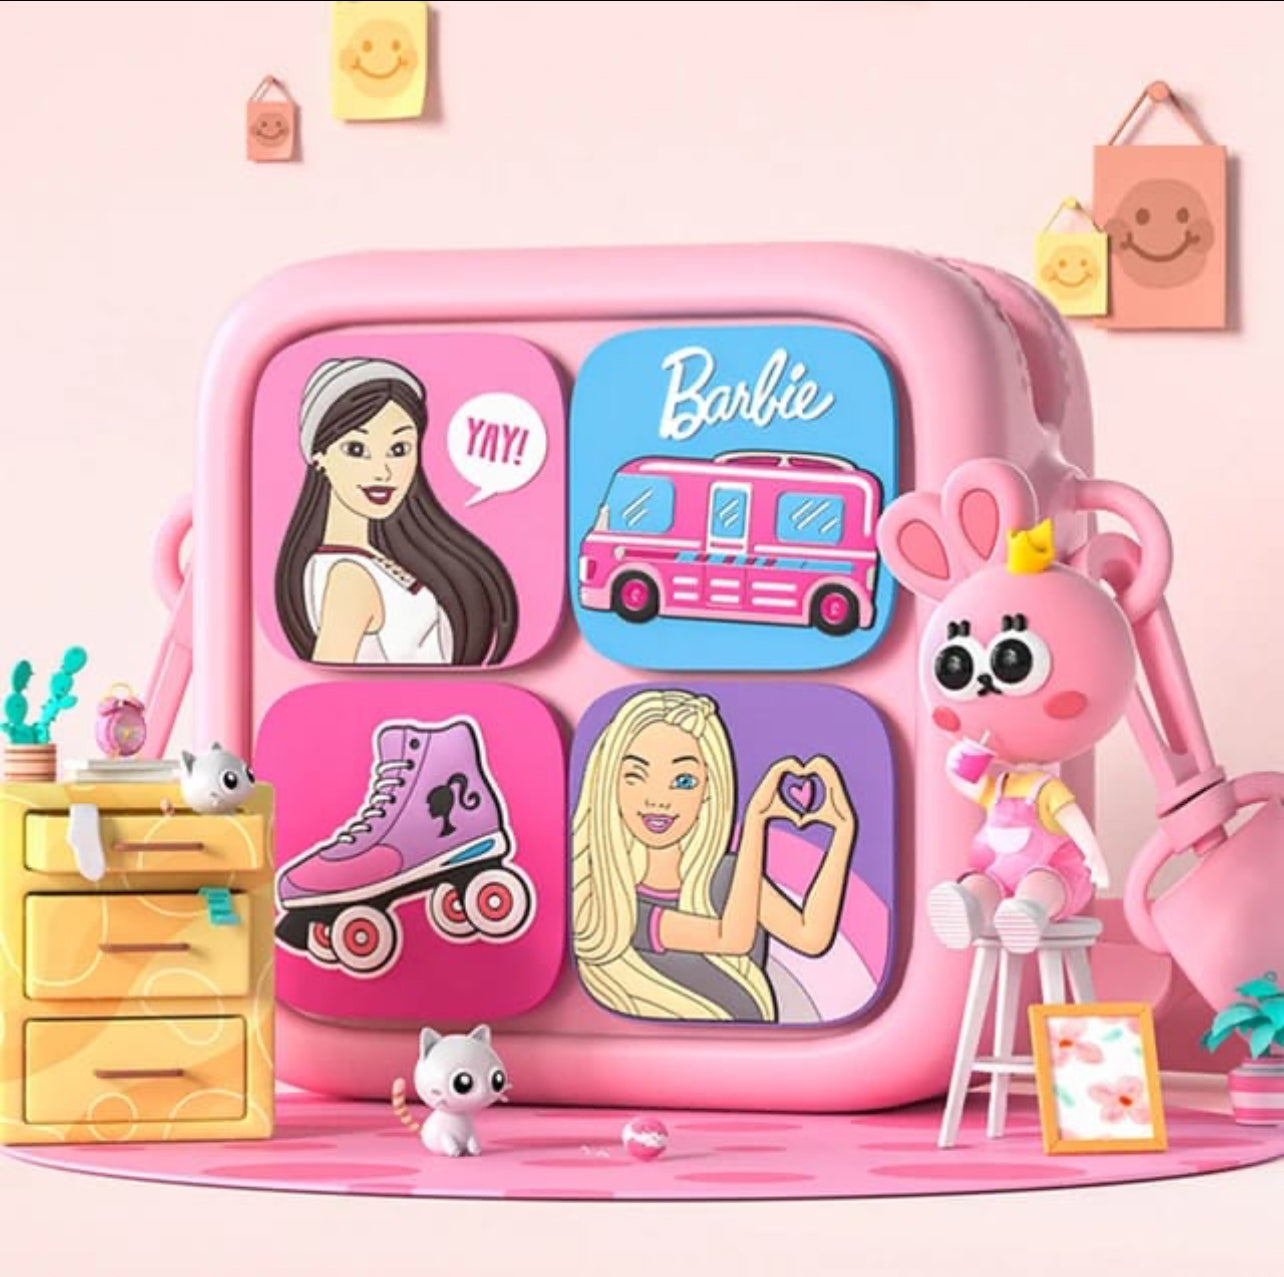 Barbie Blush - A Perfect Luxury Sling Bag for Every Barbie Fan